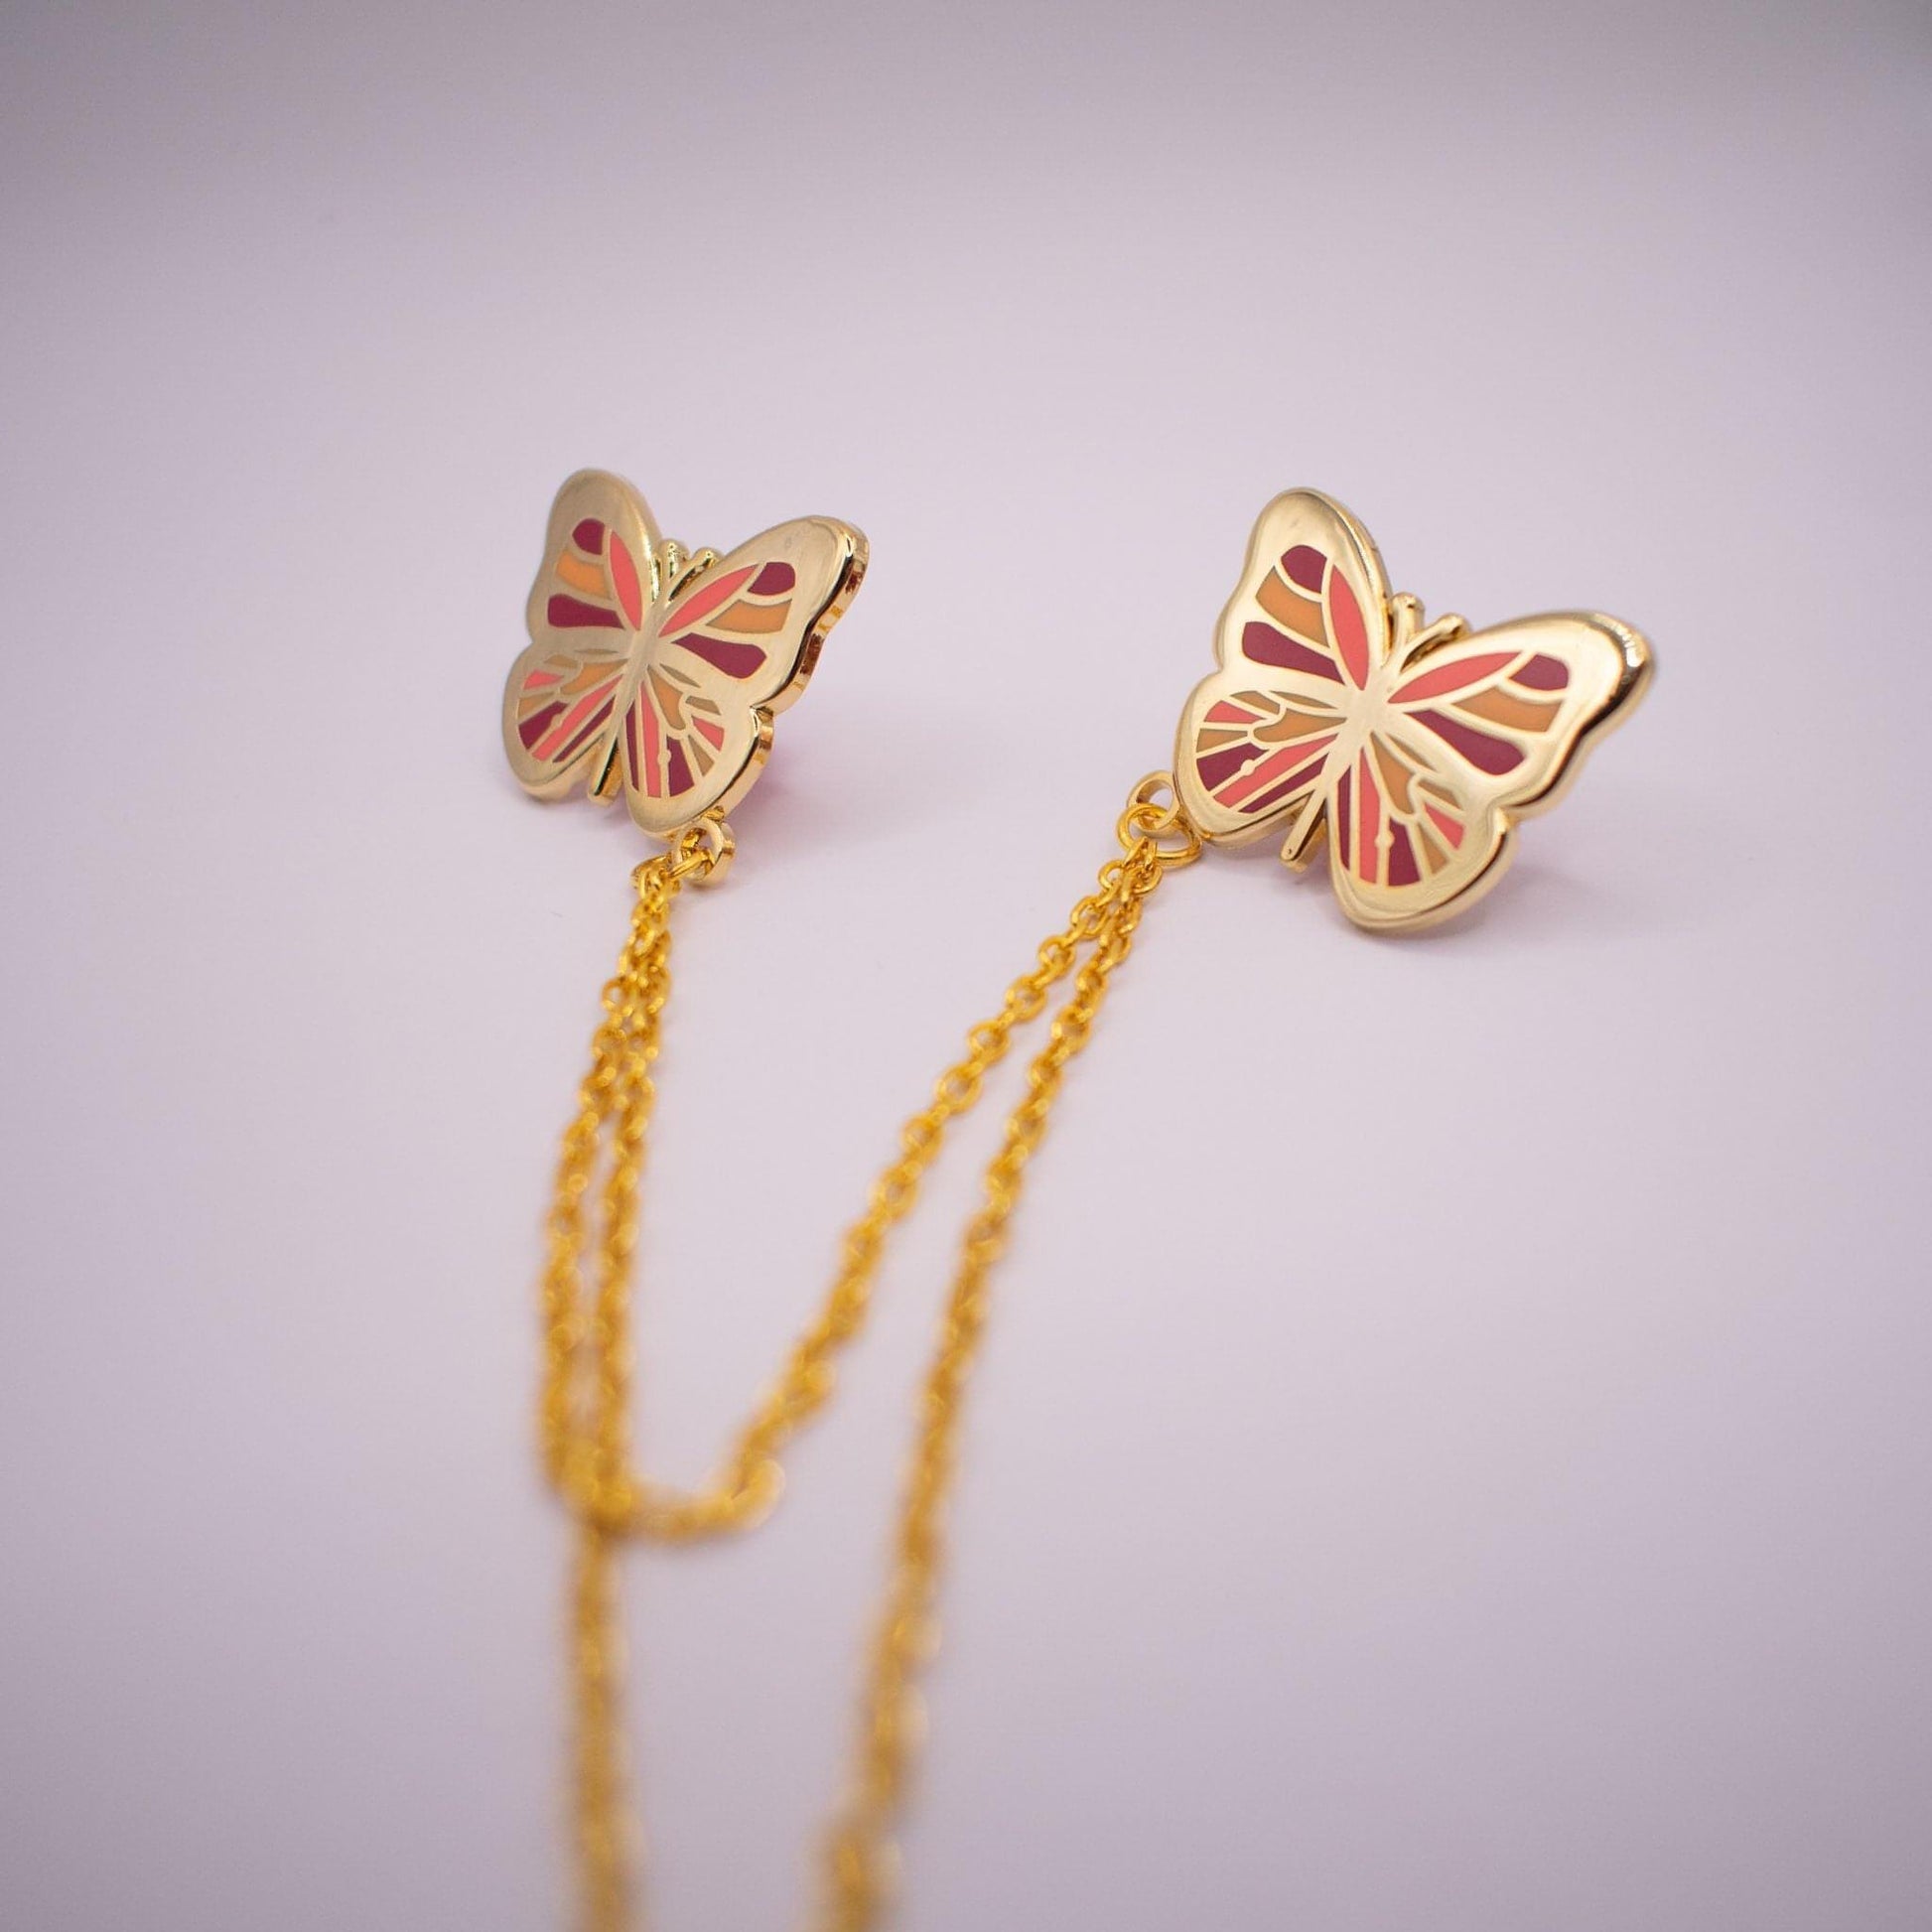 The image is a medium-distance photo of the pink and orange butterfly collar pin. Both pins are pictured and the chain length is shown also (the chains are 10cm and 15cm respectively).